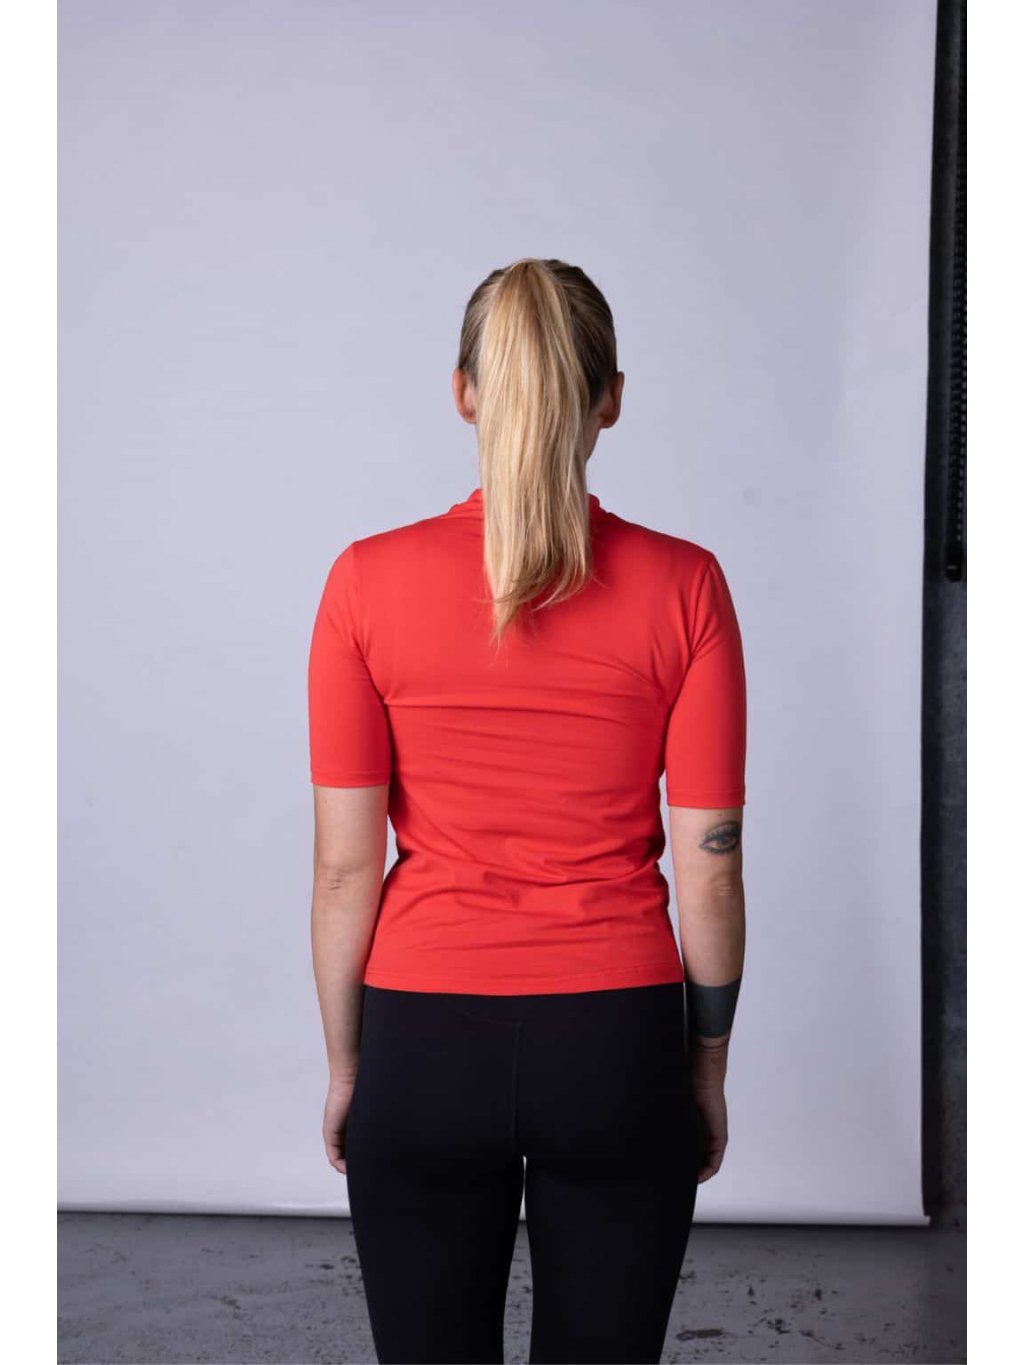 Red Women's T-shirt with a Stand-Up Collar nanosilver®